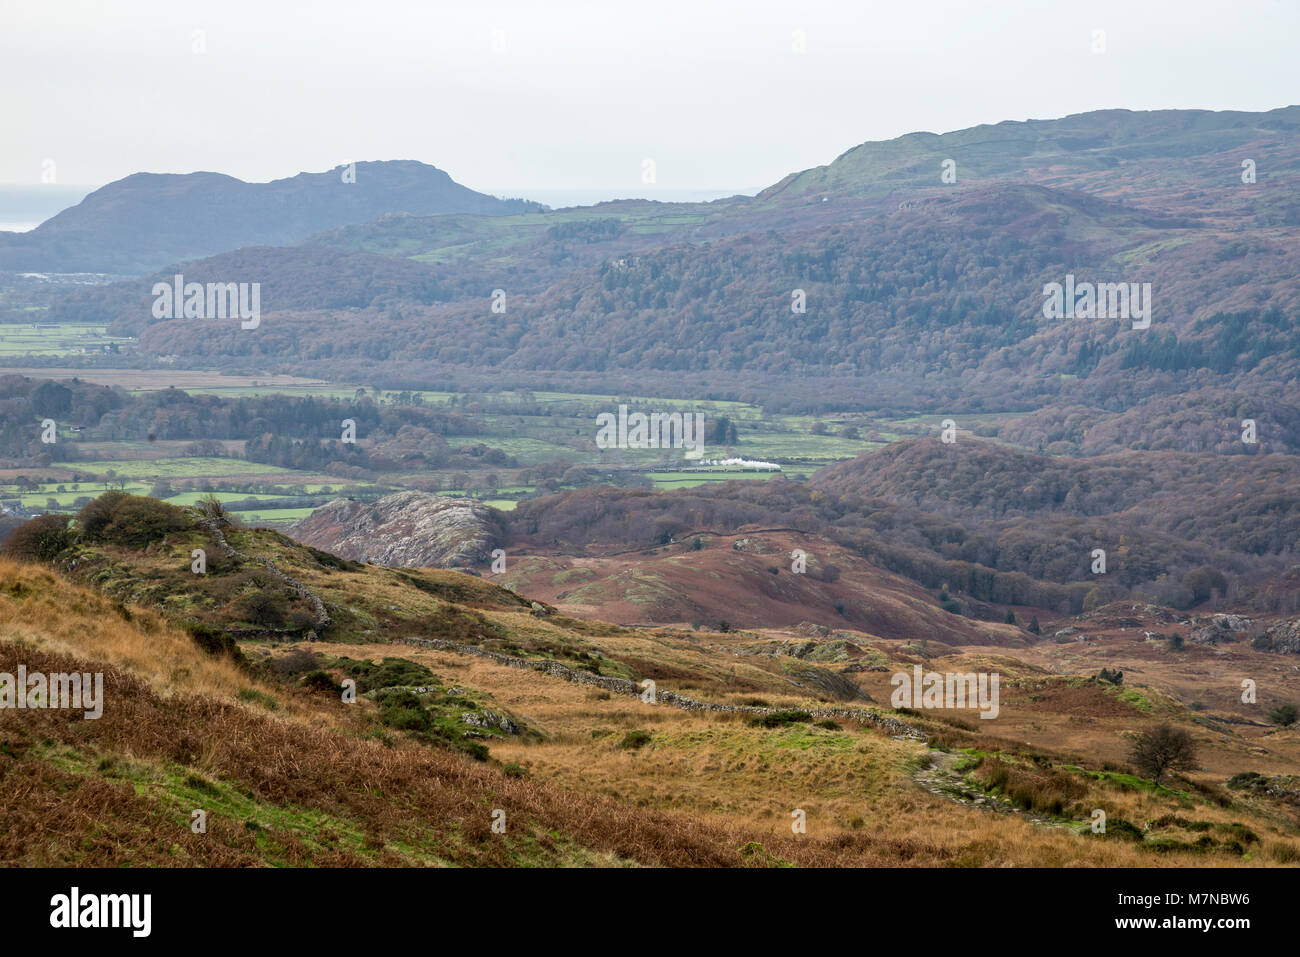 Autumnal scenery in Snowdonia national park, North Wales. Steam train seen in the valley below hills near Croesor. Stock Photo